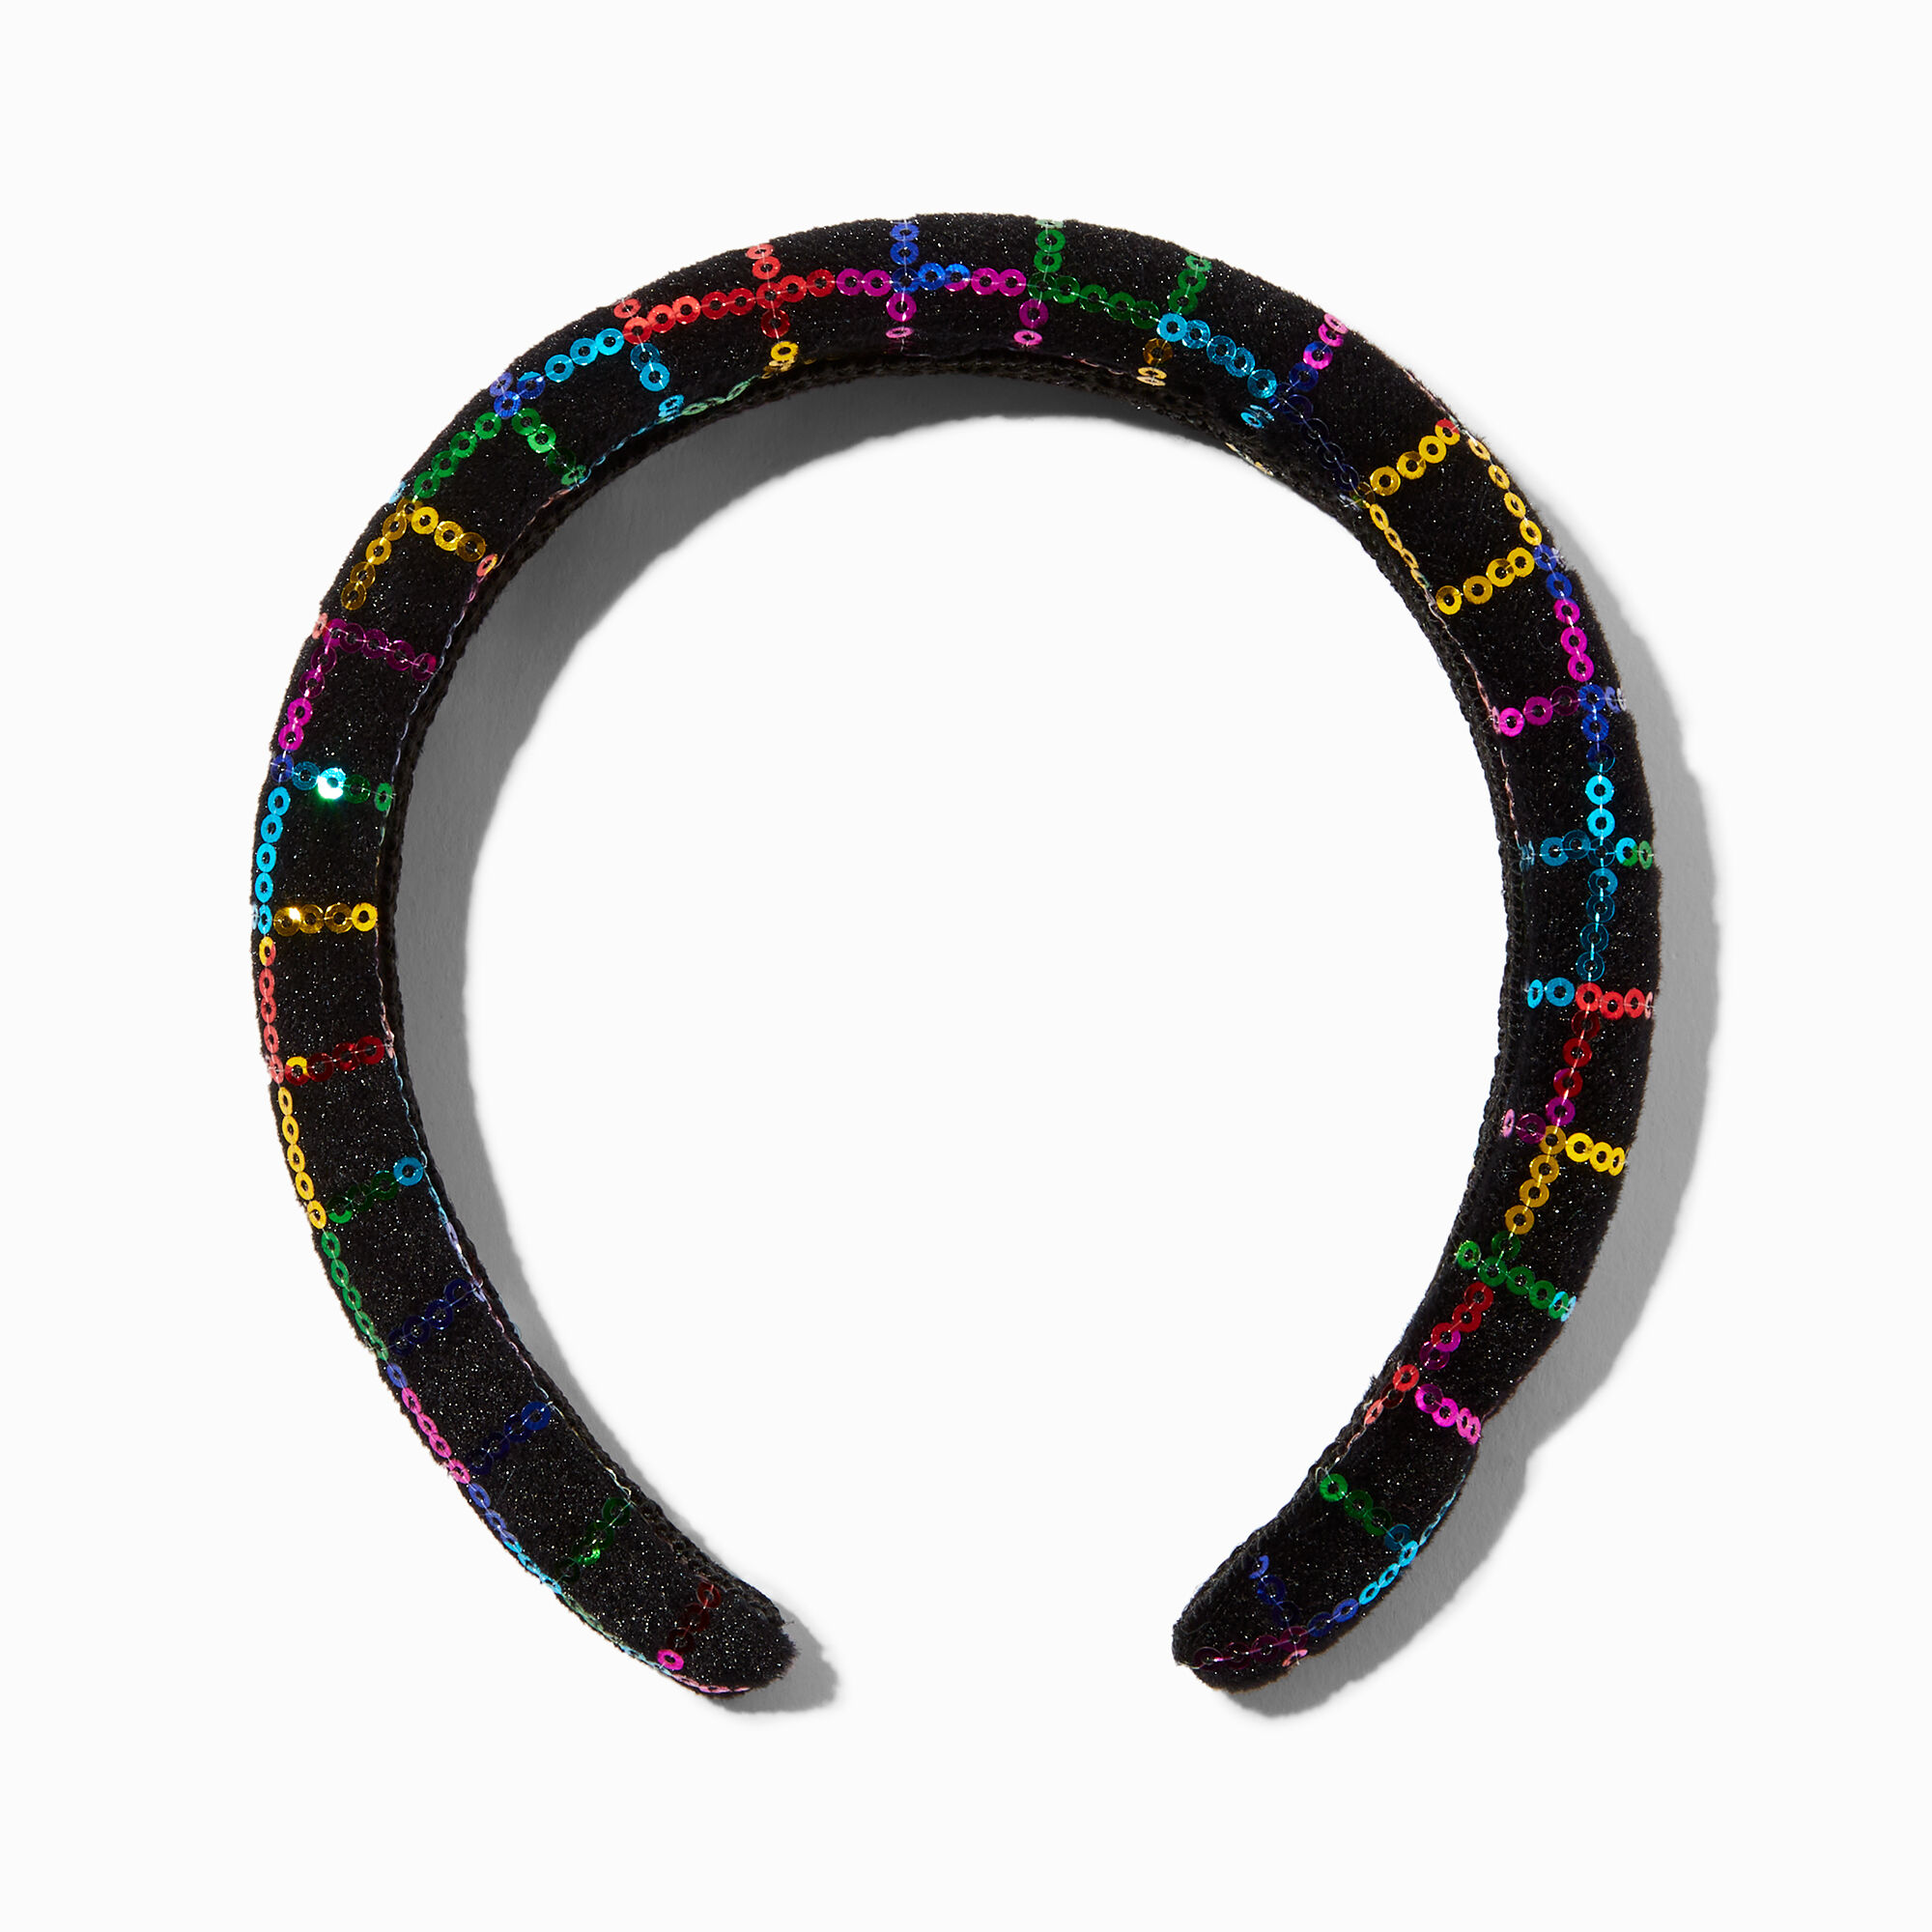 View Claires Rainbow Sequin Puffy Headband Black information